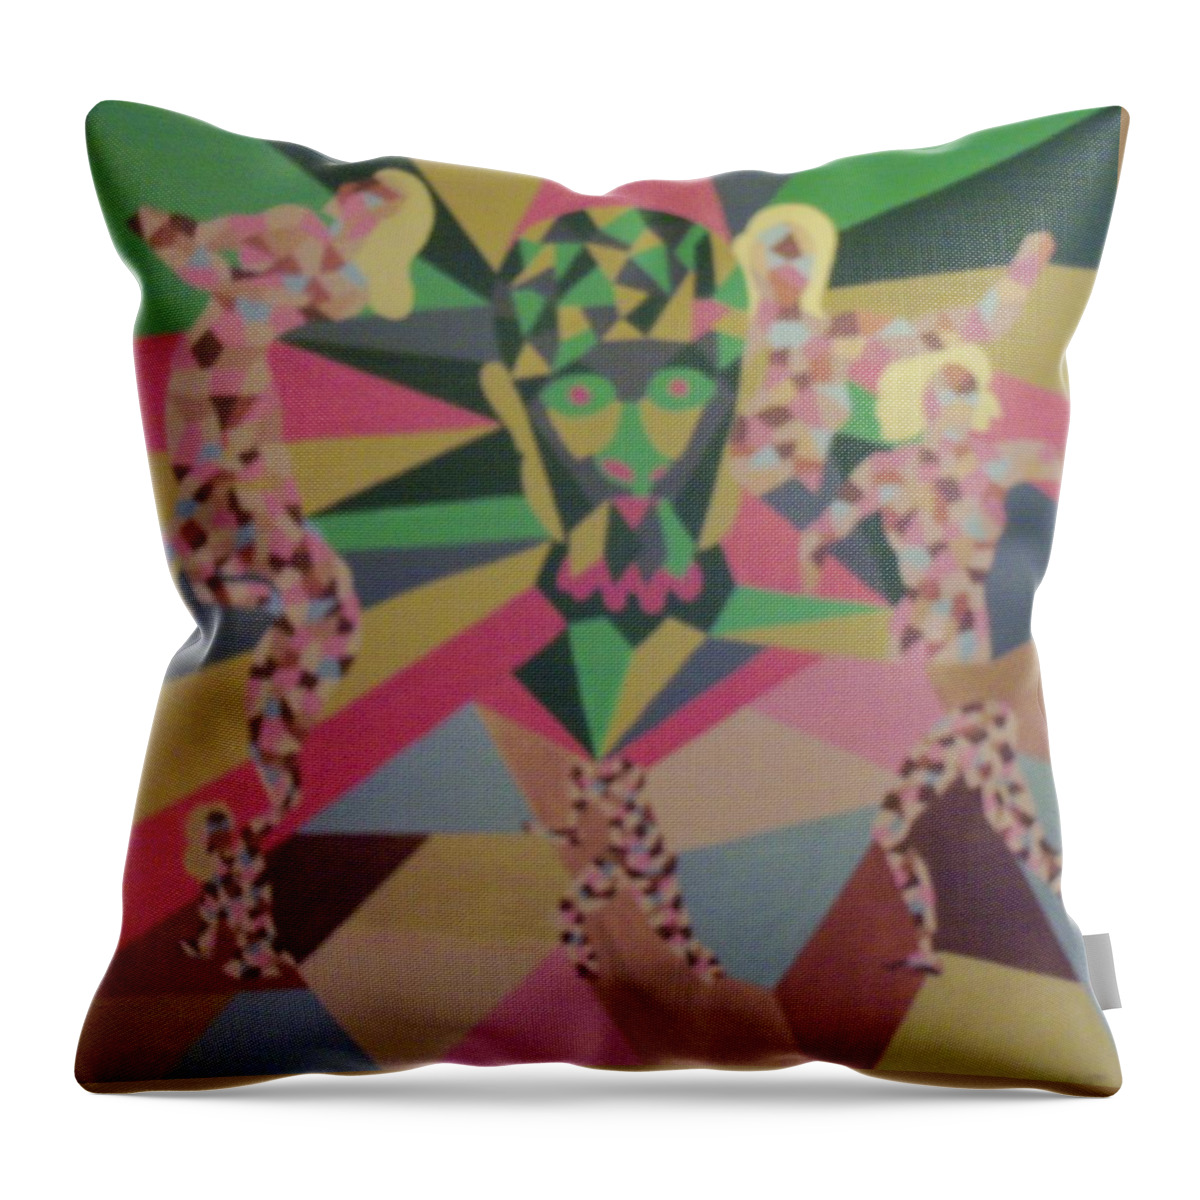 Female Nude Throw Pillow featuring the painting Shattered by Erika Jean Chamberlin